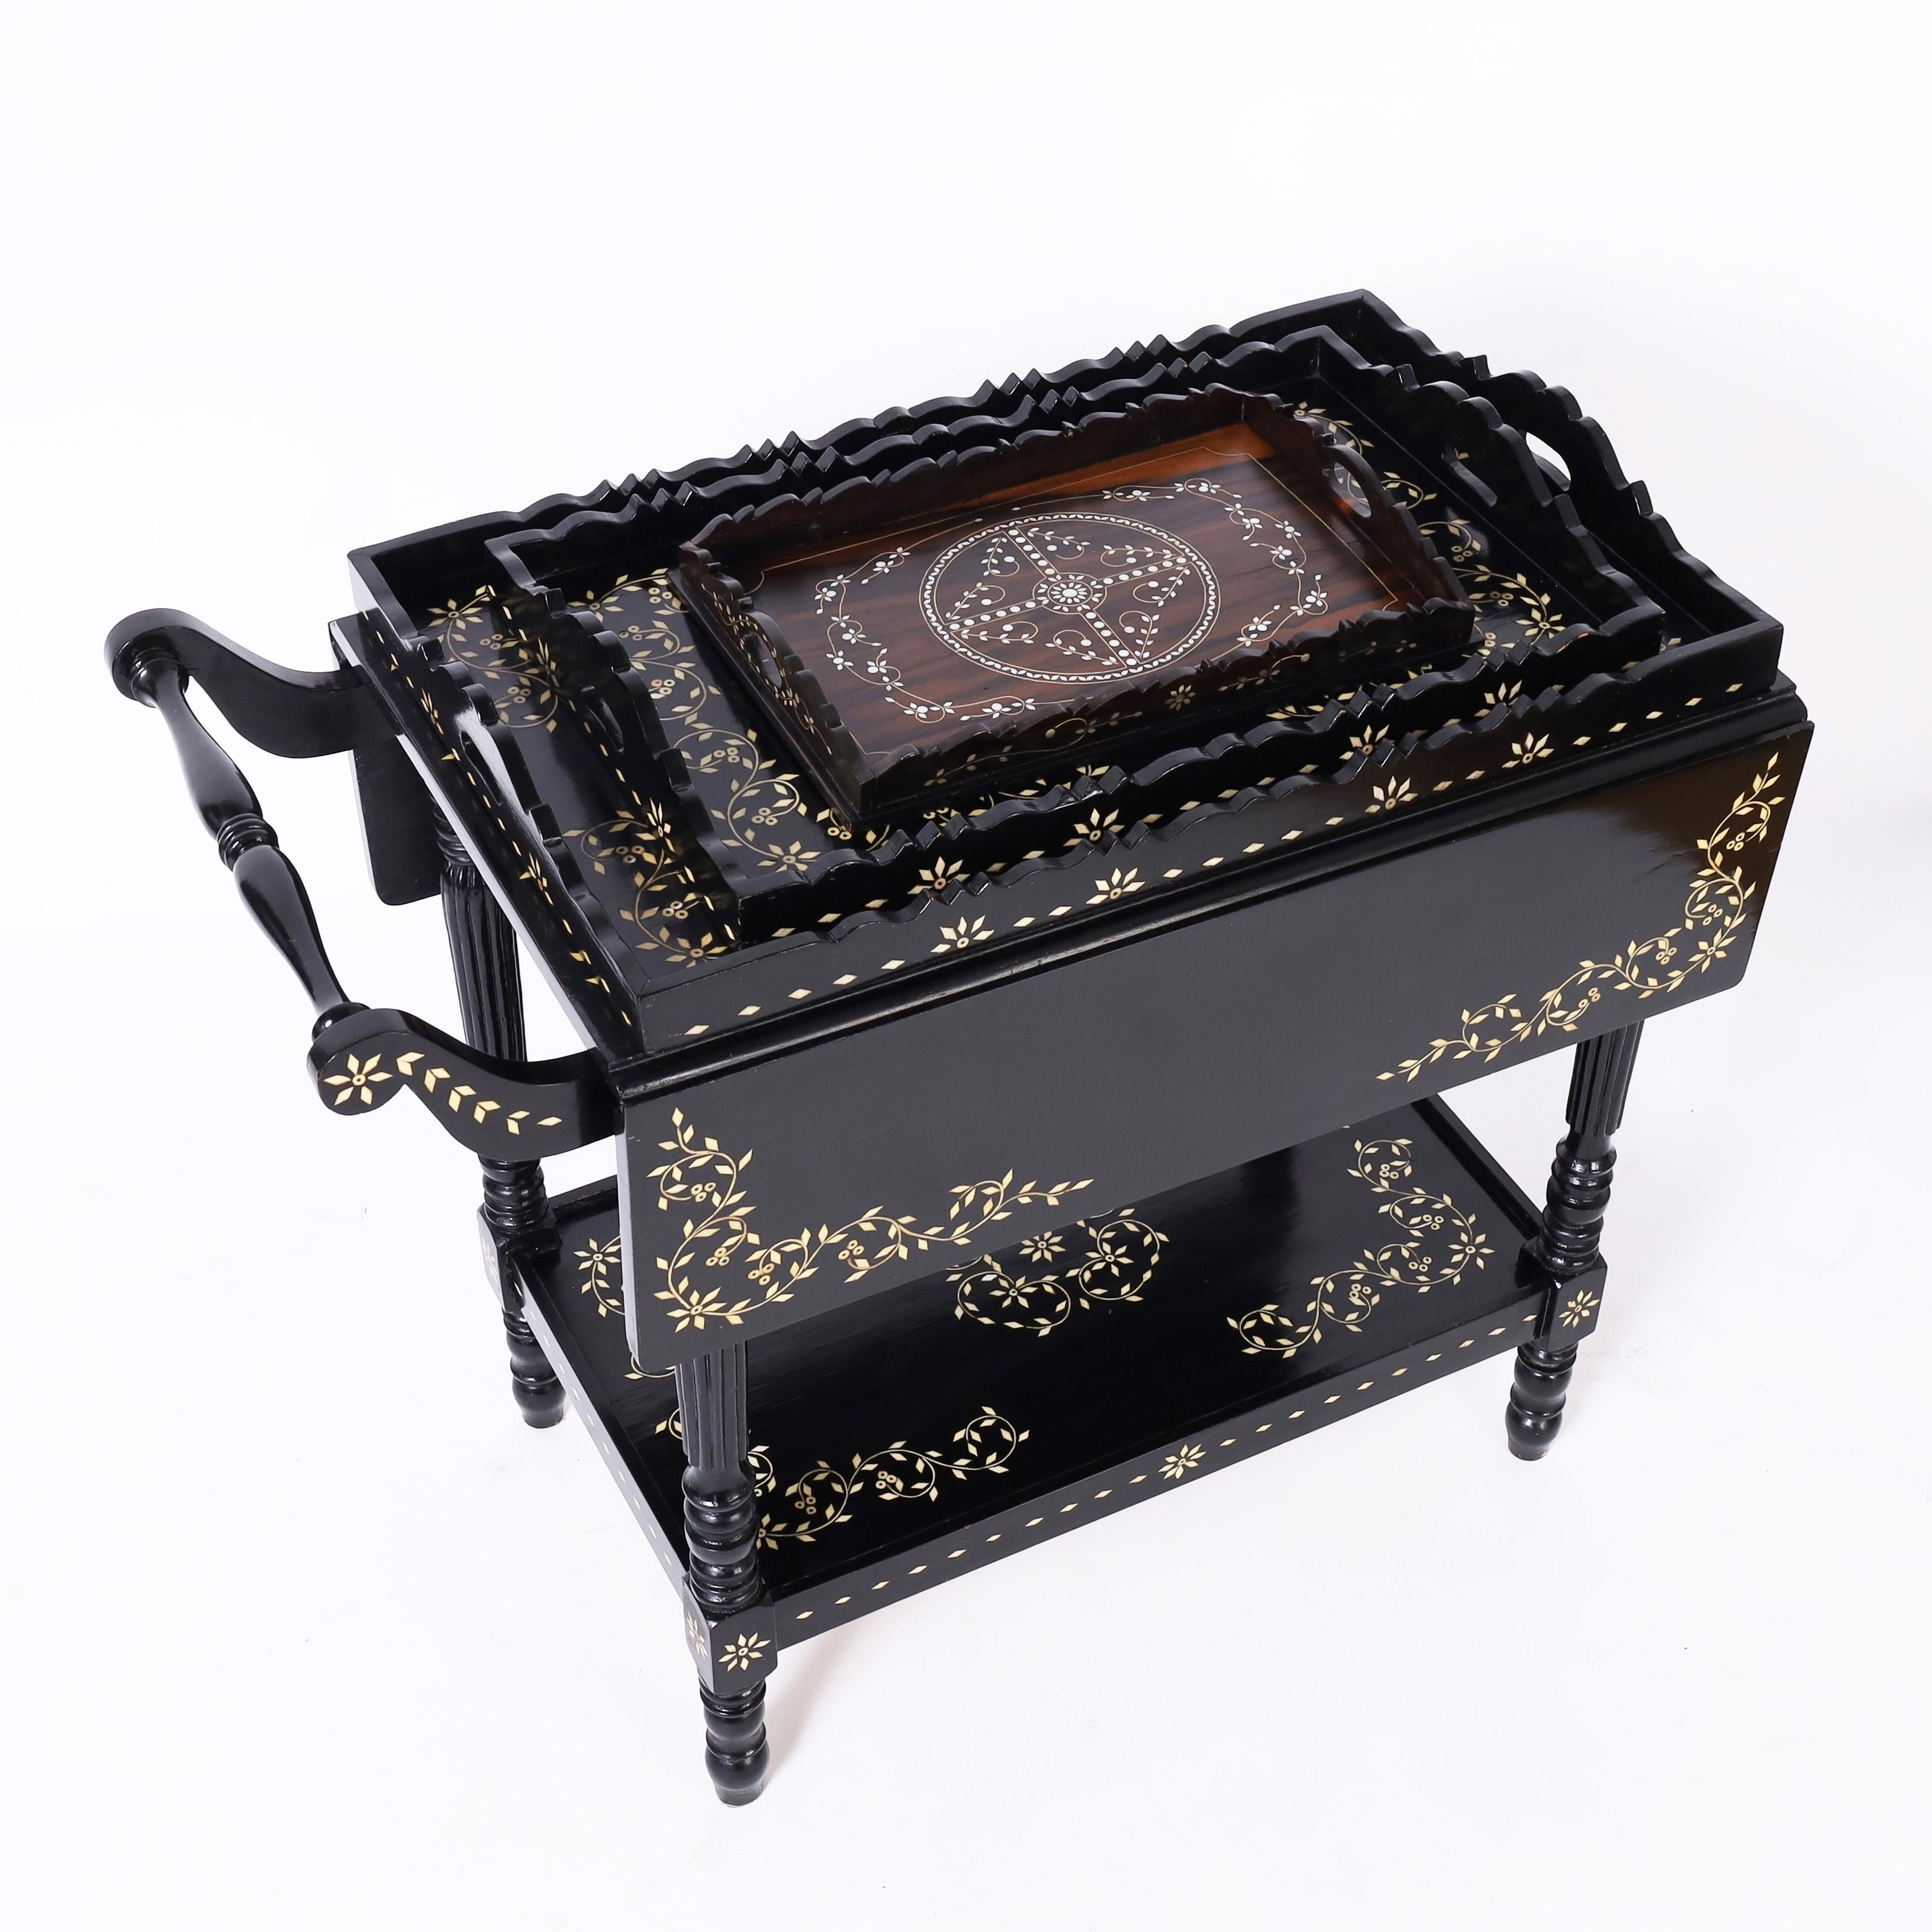 Standout vintage Anglo Indian server or bar crafted in indigenous hardwood with an ebonized finish featuring drop leaves, turned legs, three trays and floral bone inlays throughout. 

Closed depth is 18